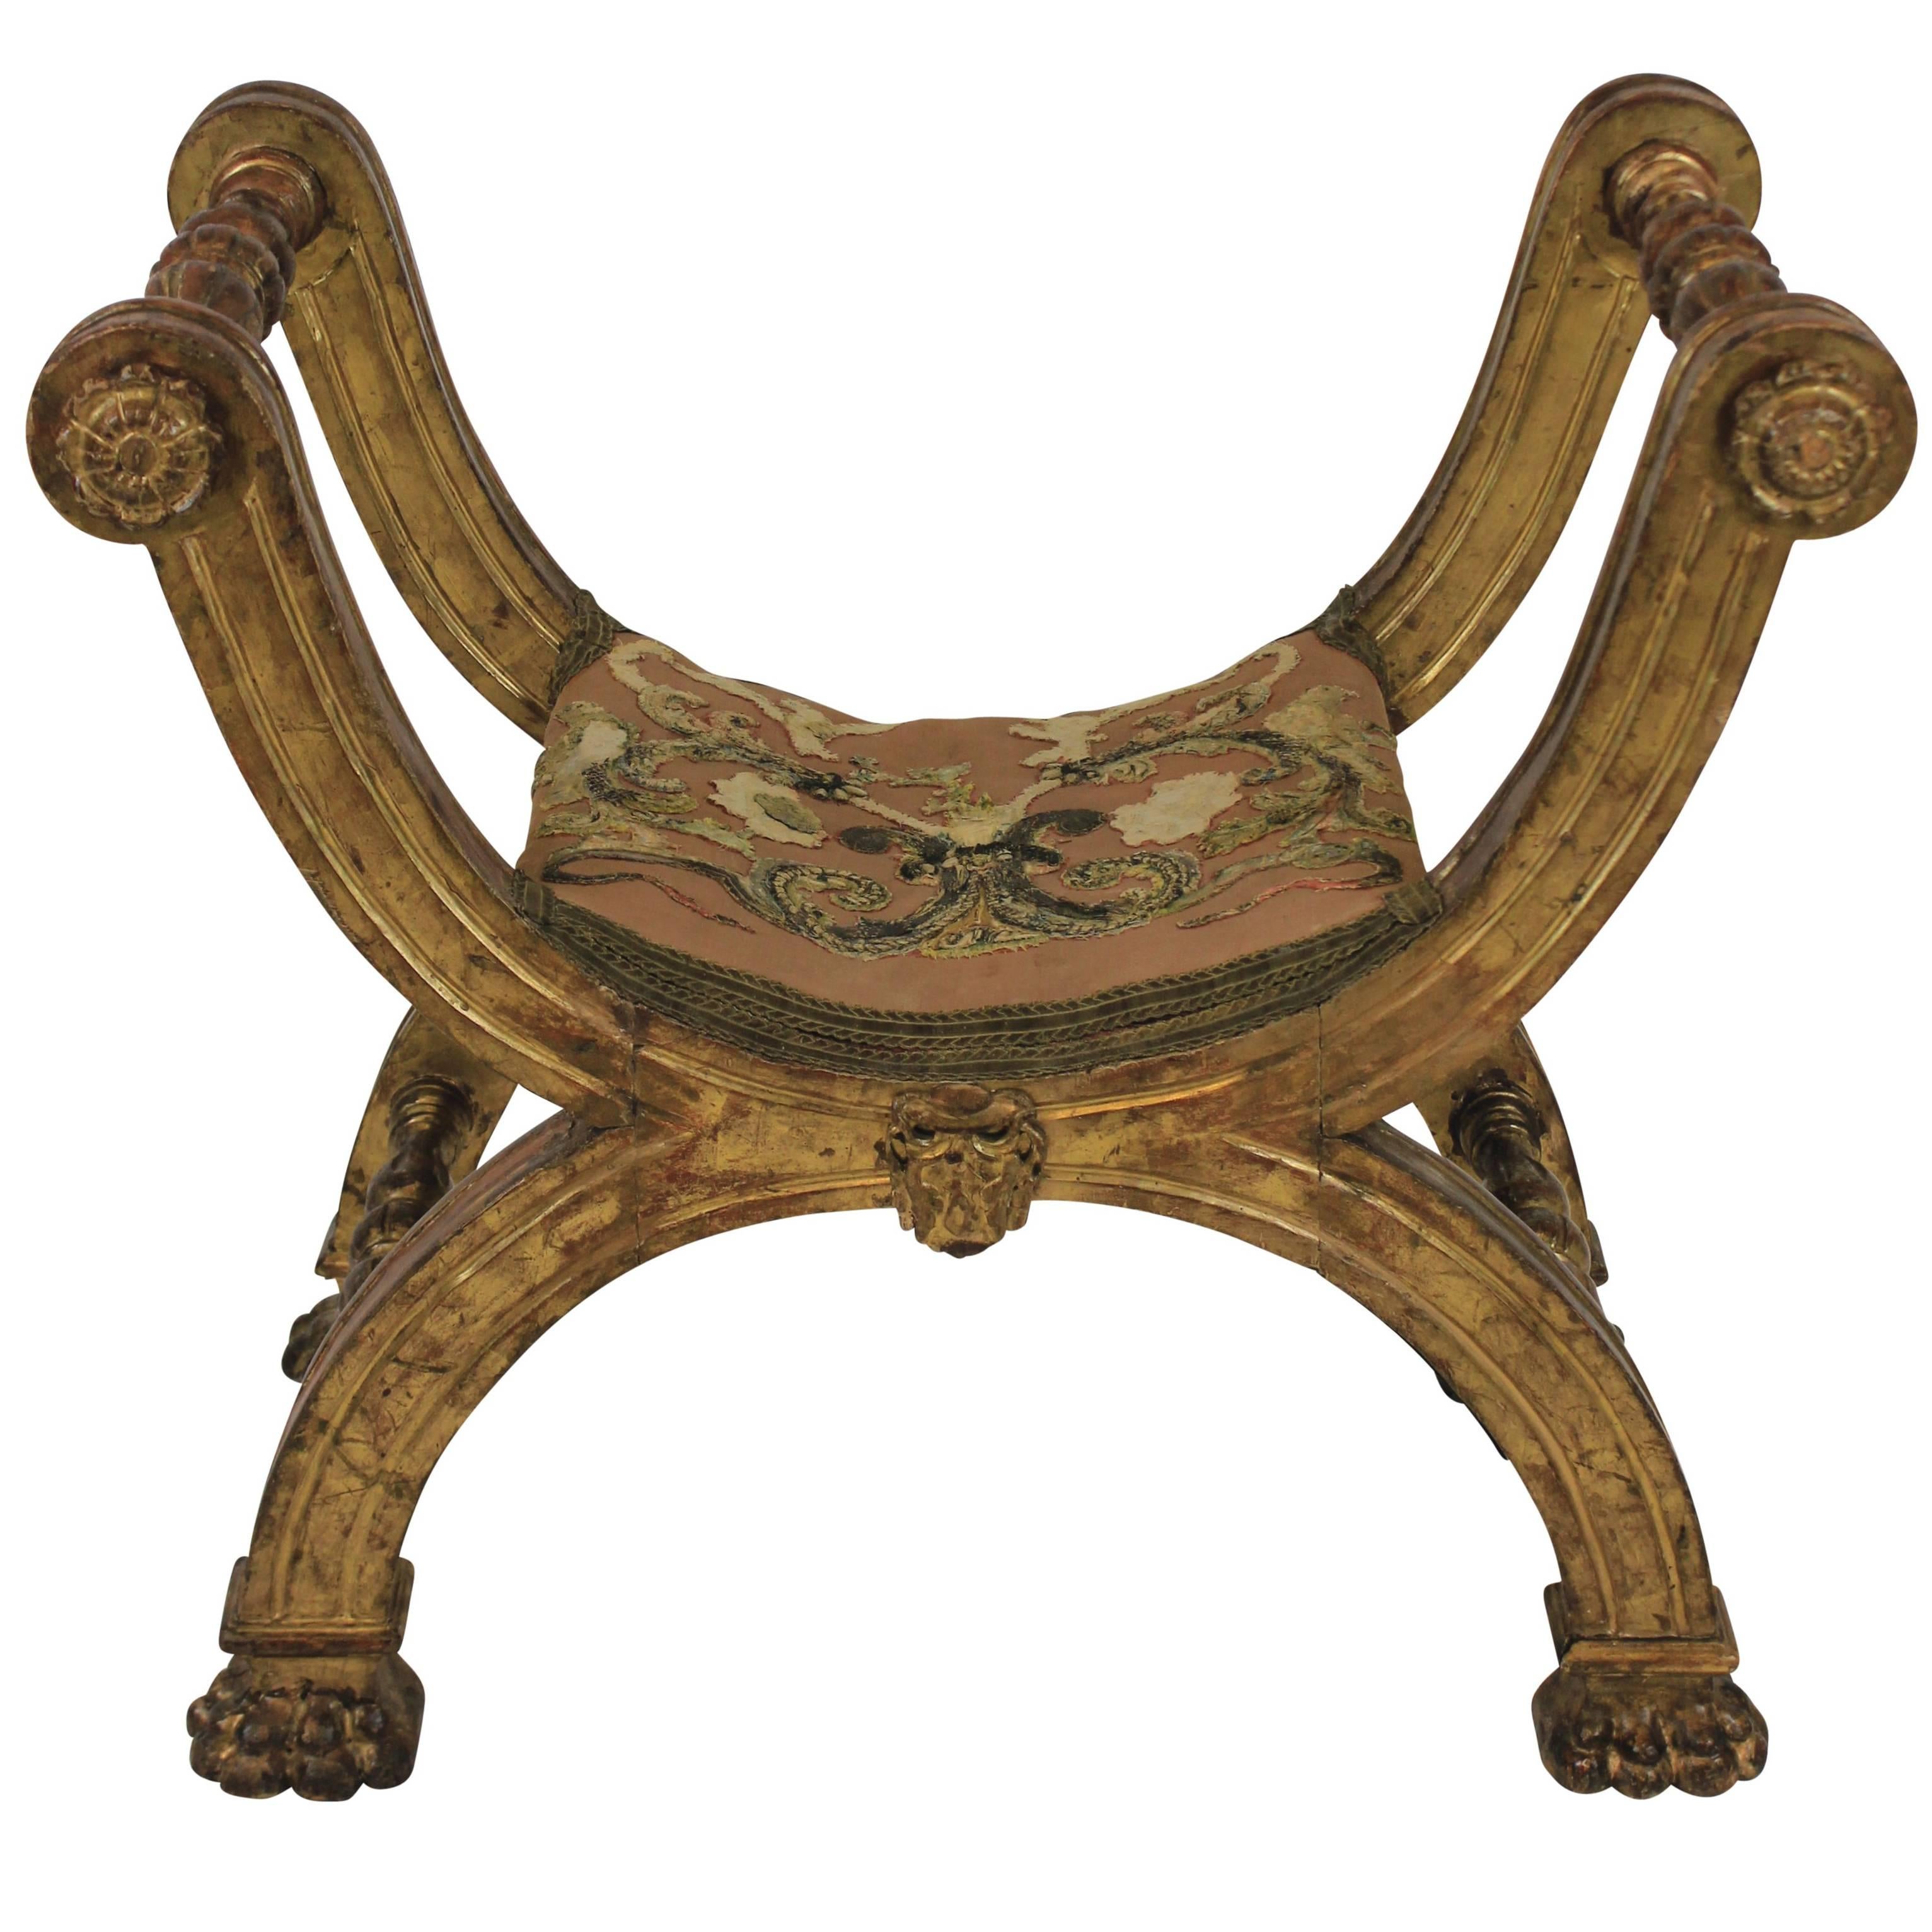 Early 18th Century Cardinal's Seat